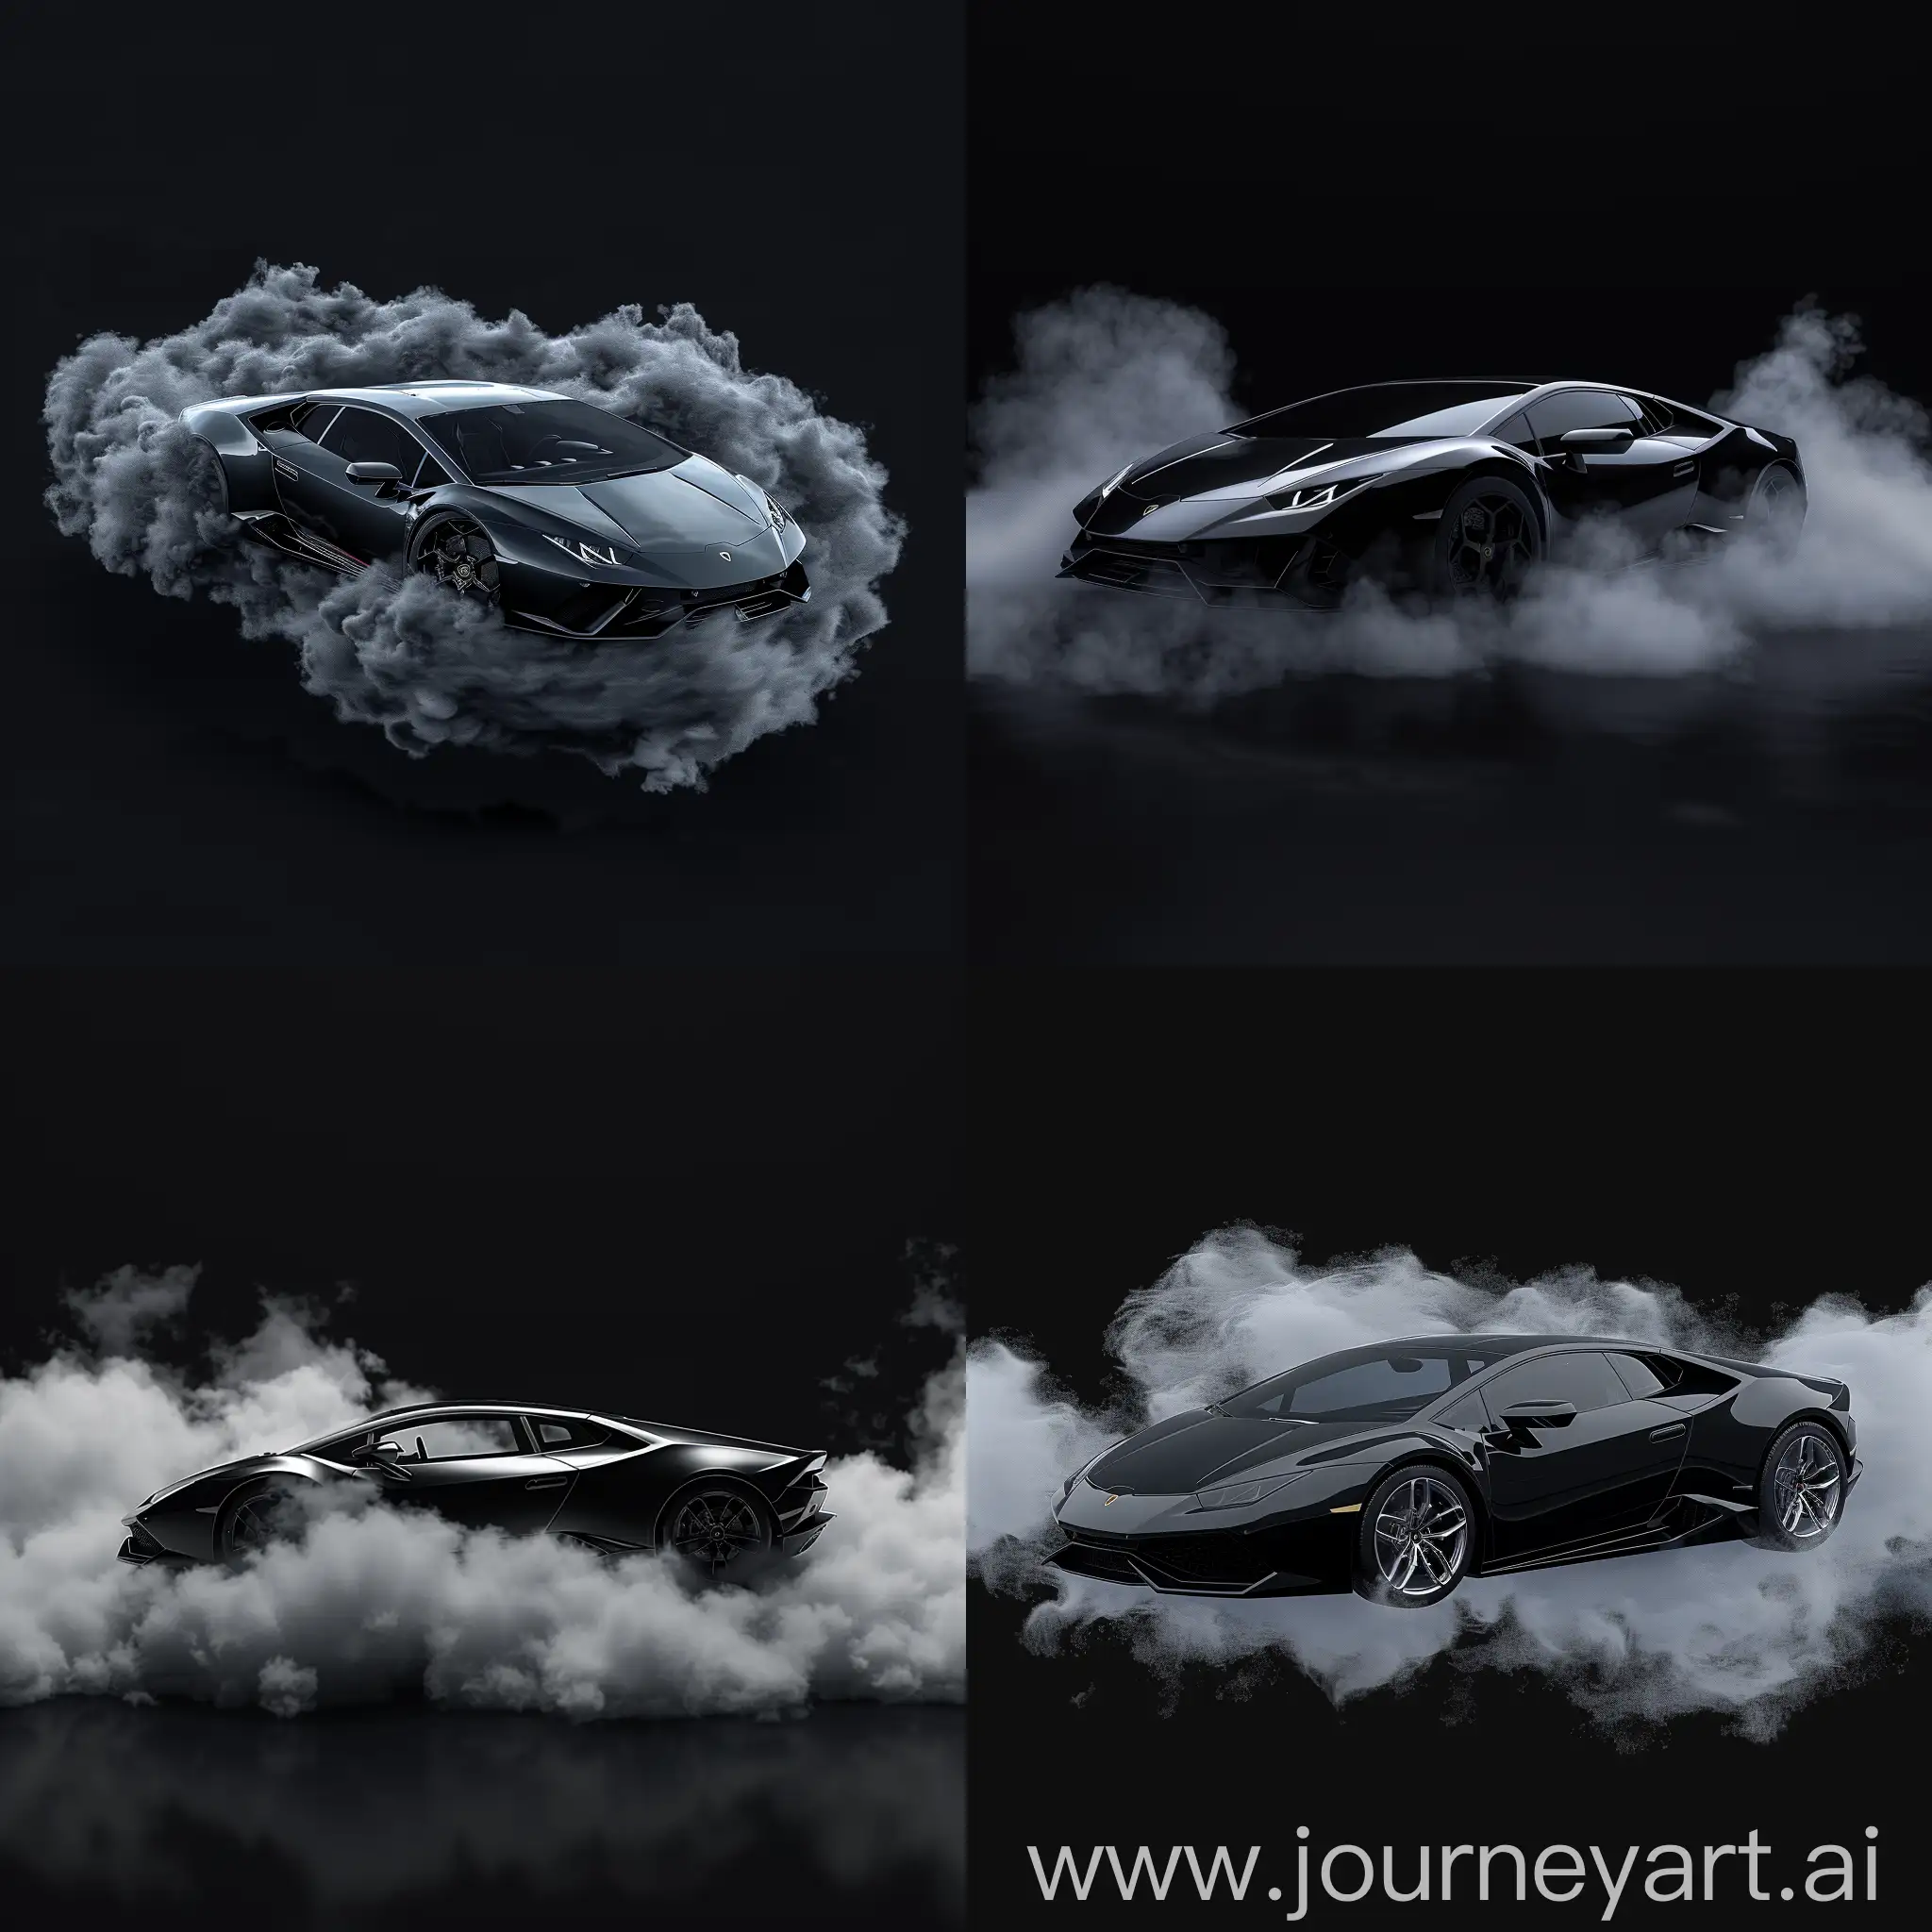 A black Lamborghini in a thick cloud levitating on a black background. The 3D rendering style is realistic